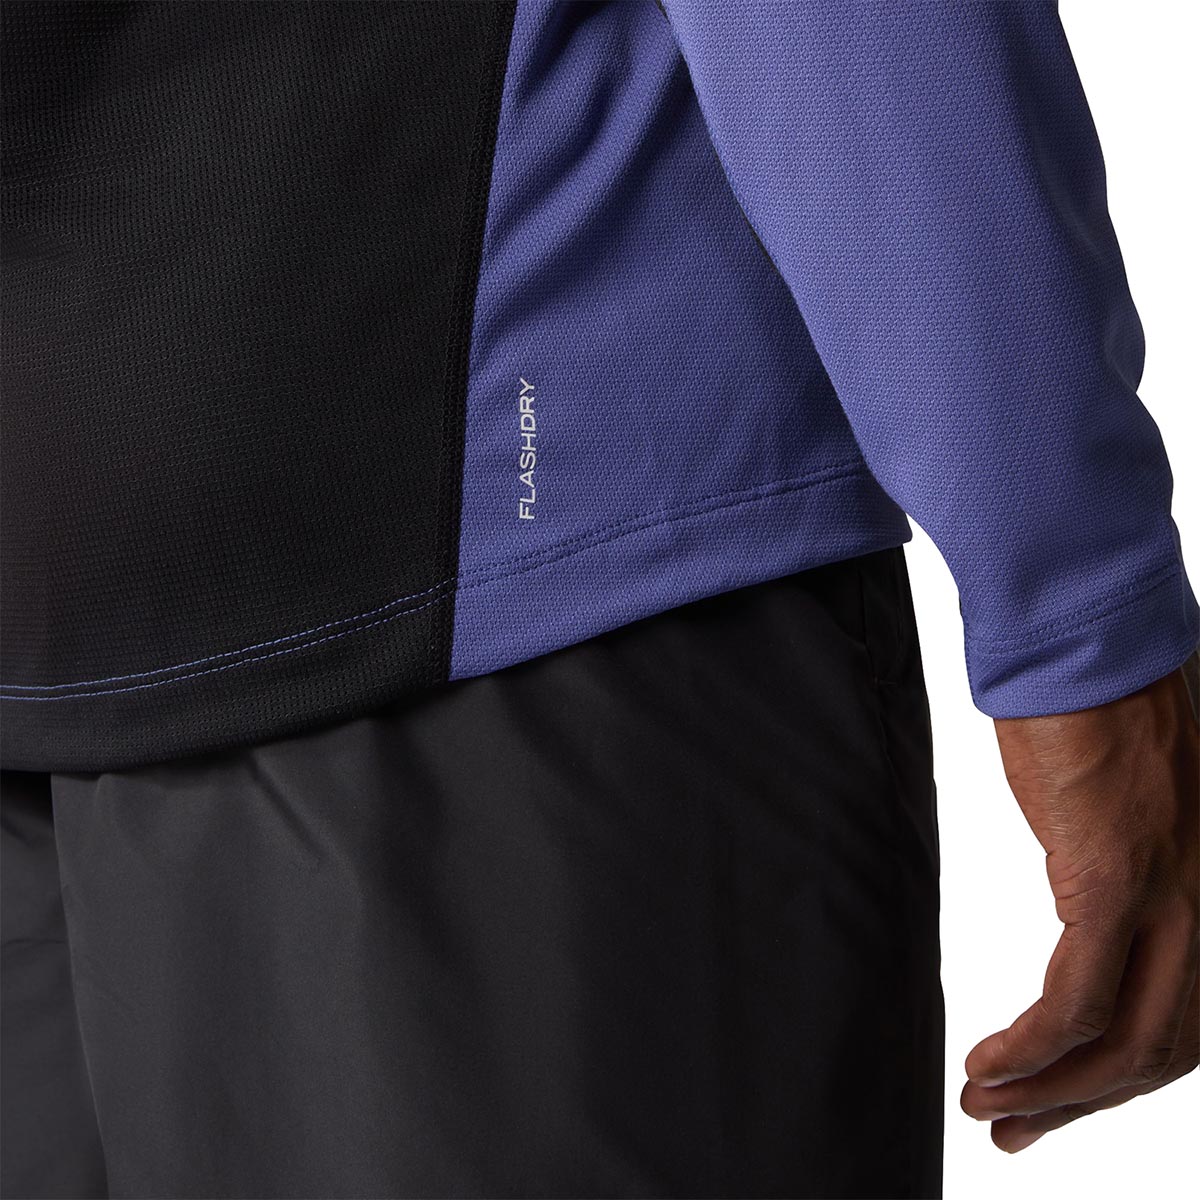 THE NORTH FACE - LIGHTBRIGHT LONG-SLEEVE T-SHIRT